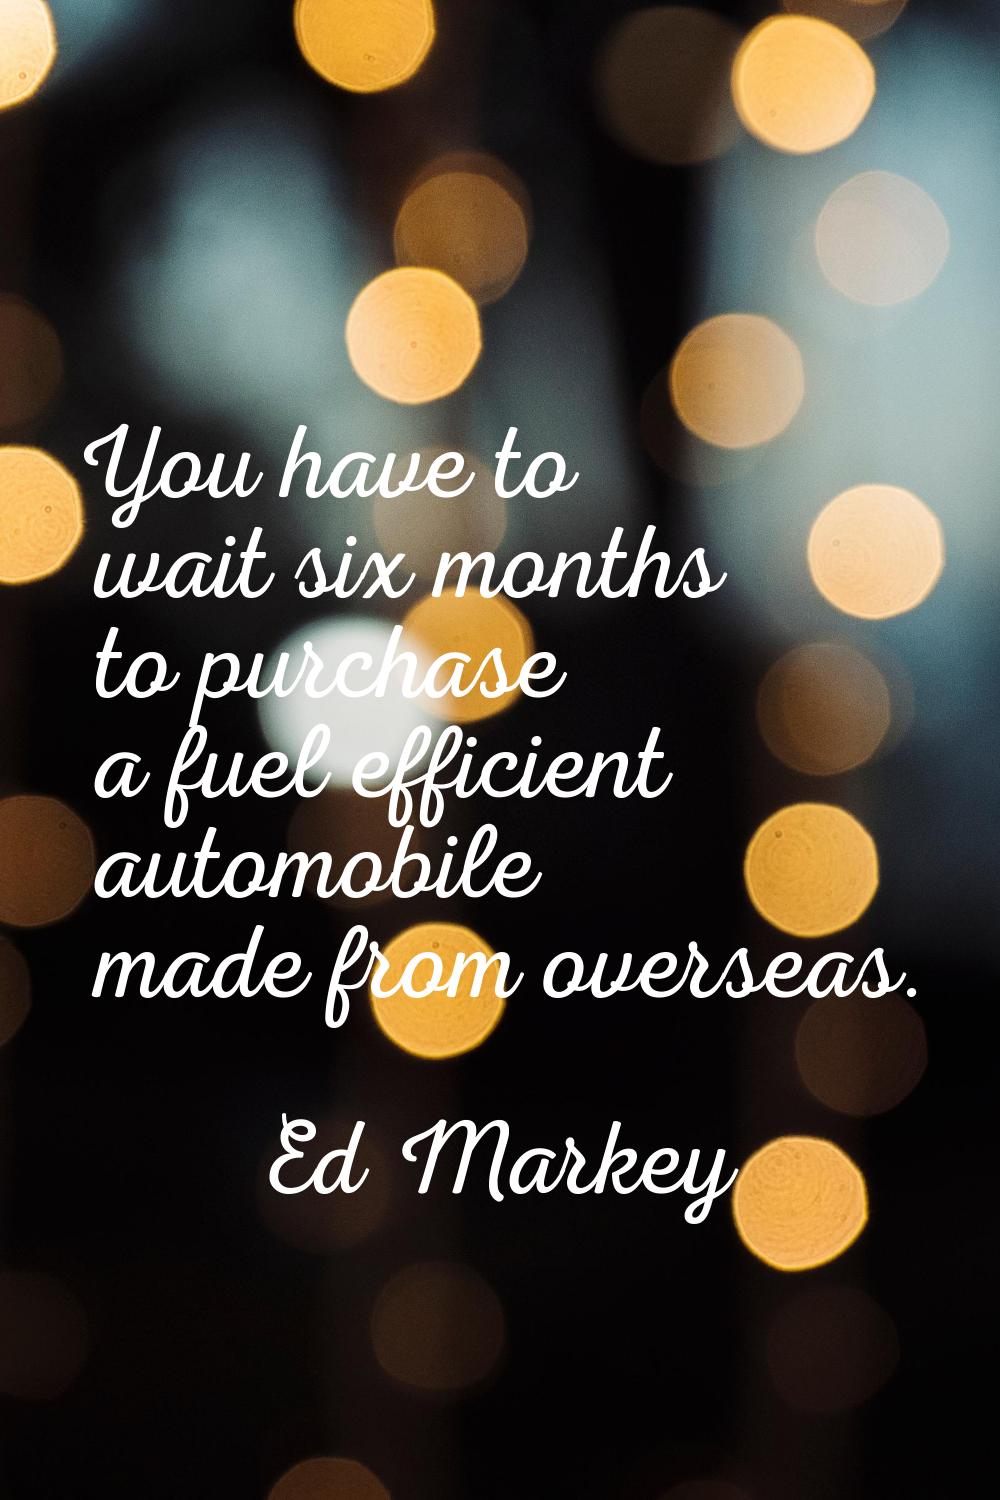 You have to wait six months to purchase a fuel efficient automobile made from overseas.